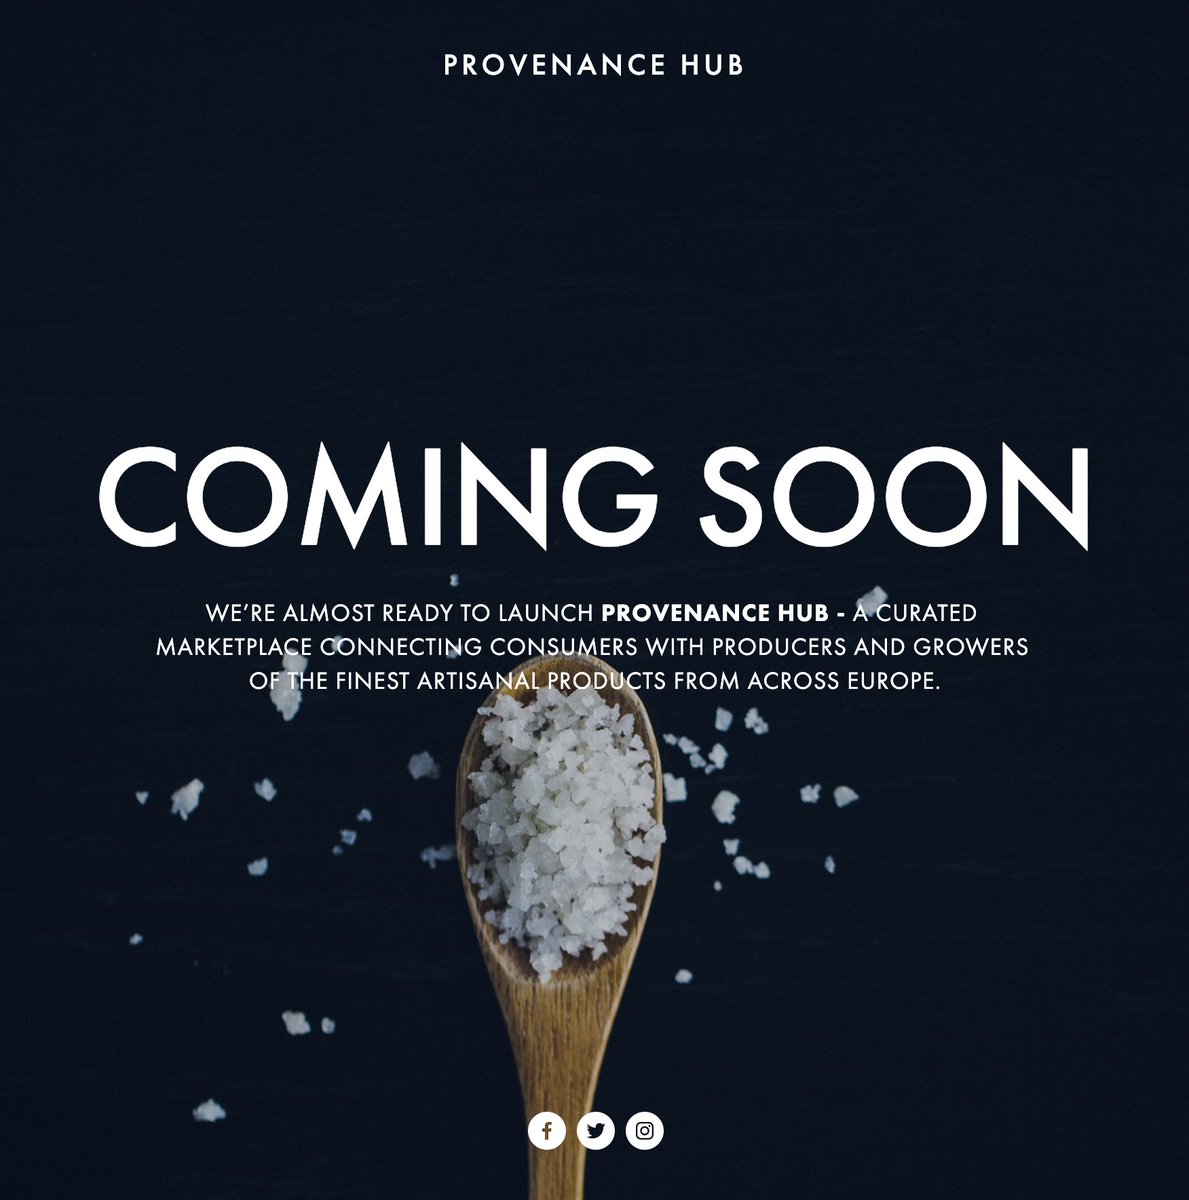 WE’RE ALMOST READY TO LAUNCH PROVENANCE HUB - A CURATED MARKETPLACE CONNECTING CONSUMERS WITH PRODUCERS AND GROWERS OF THE FINEST ARTISANAL PRODUCTS FROM ACROSS EUROPE. #provenancehub #passionateproducers #marketplace